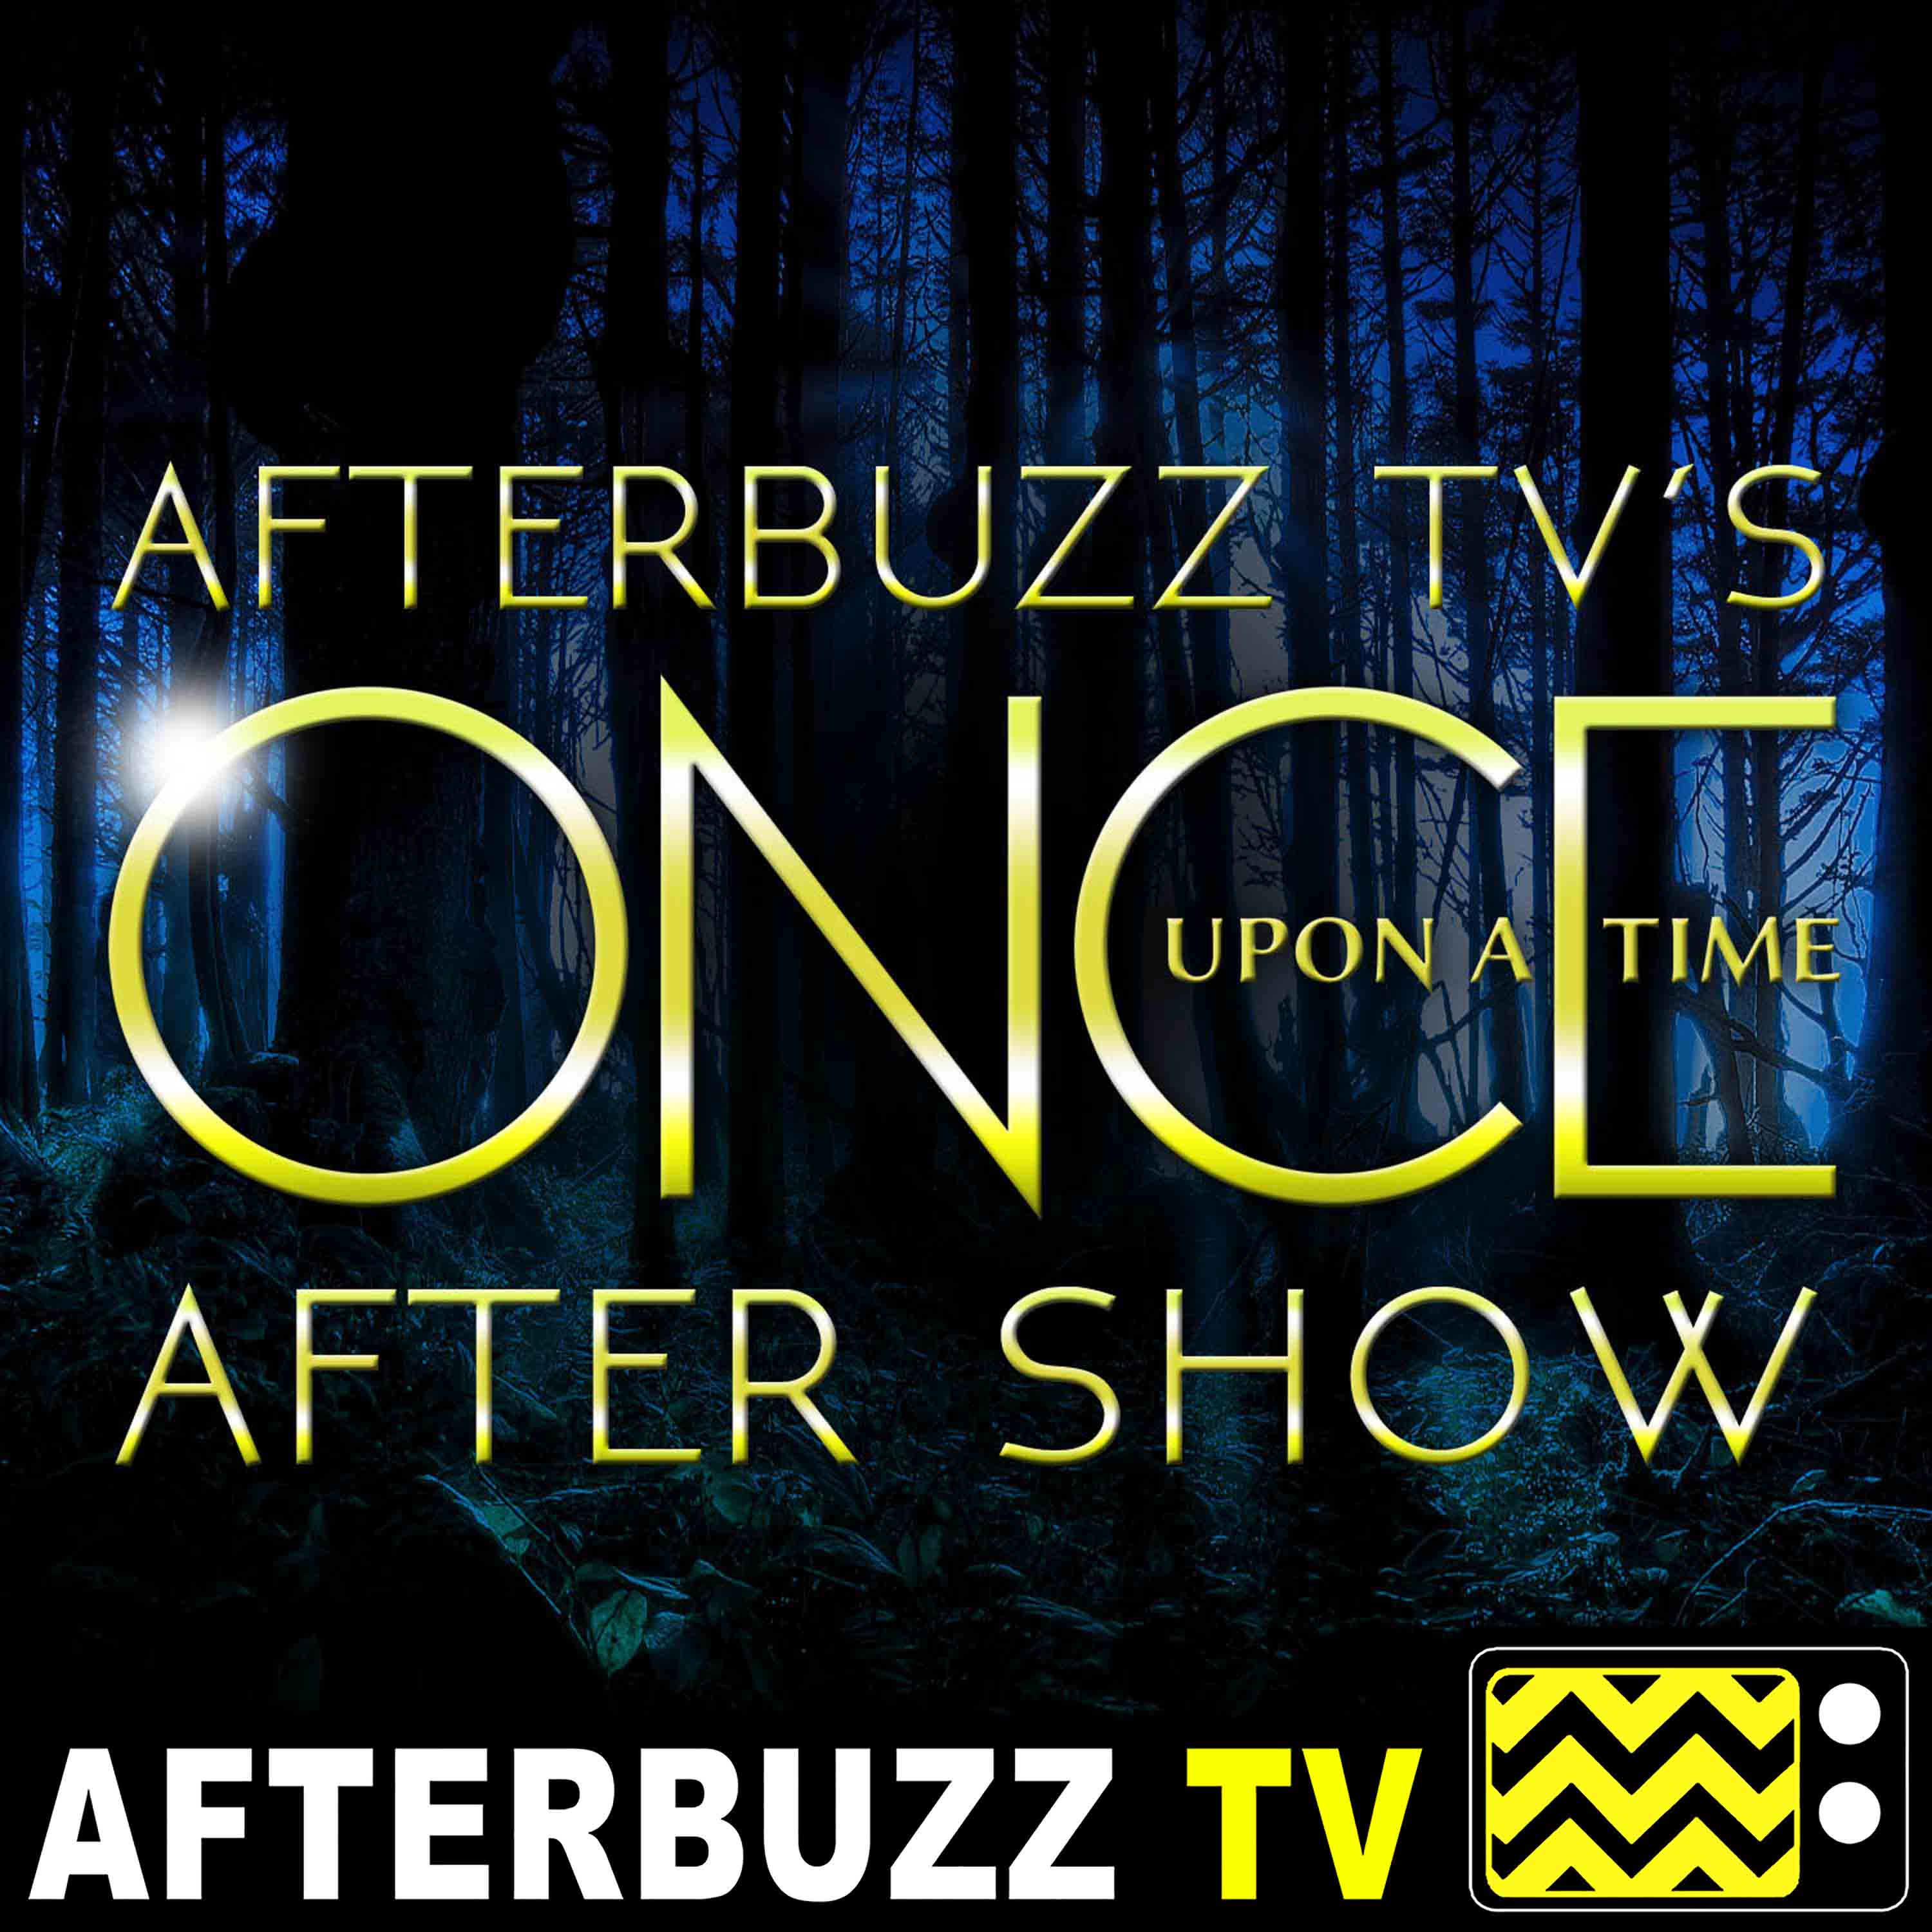 Once Upon A Time S:7 | Kip Pardue guests on Chosen E:17 | AfterBuzz TV AfterShow